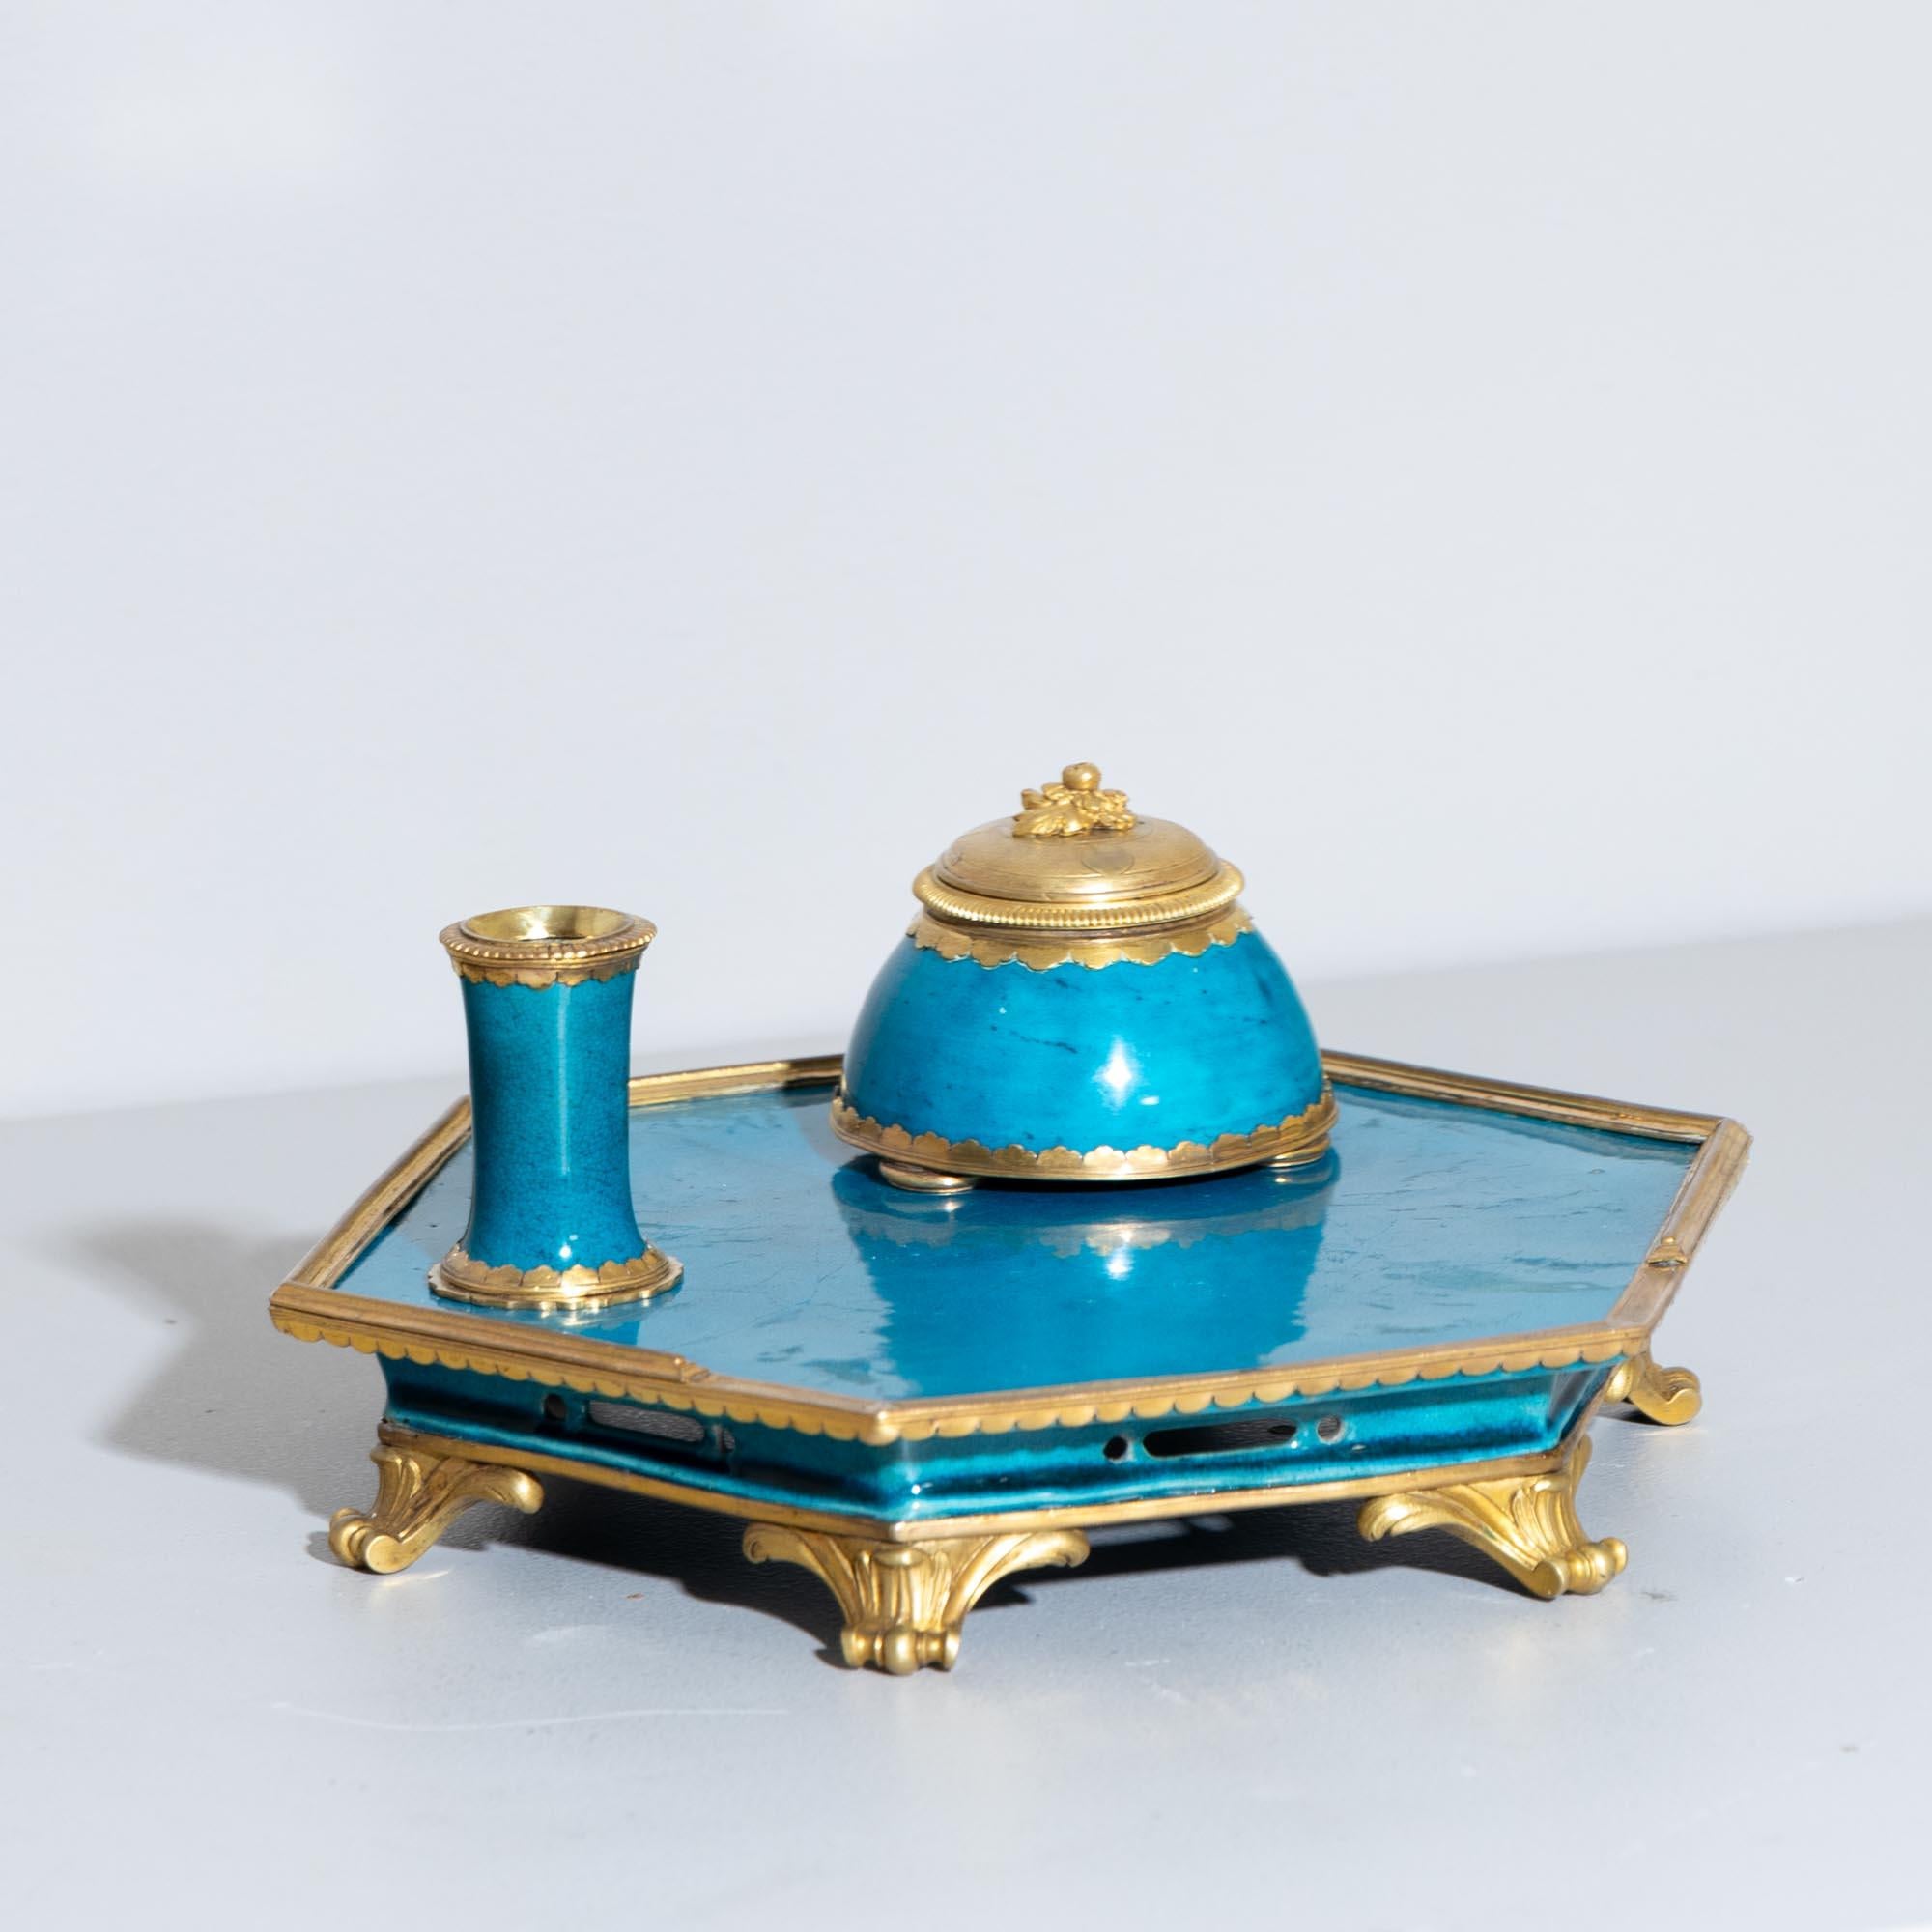 Turquoise Writing Set with Bronze Mountings, China, 18th Century 1